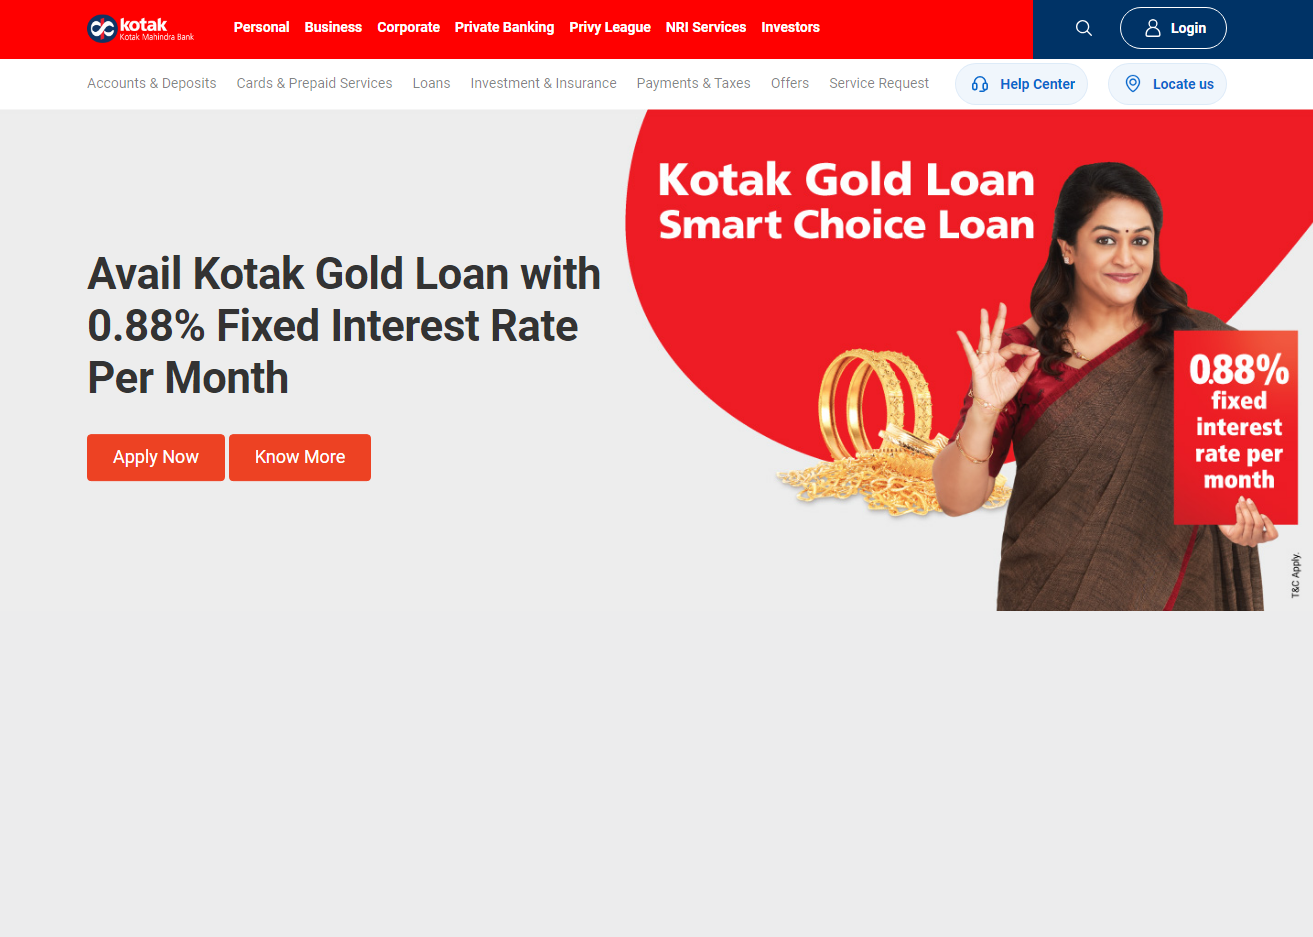 Kotak Mahindra Bank’s shares plummeted by 10%. Here’s the latest stock price target.